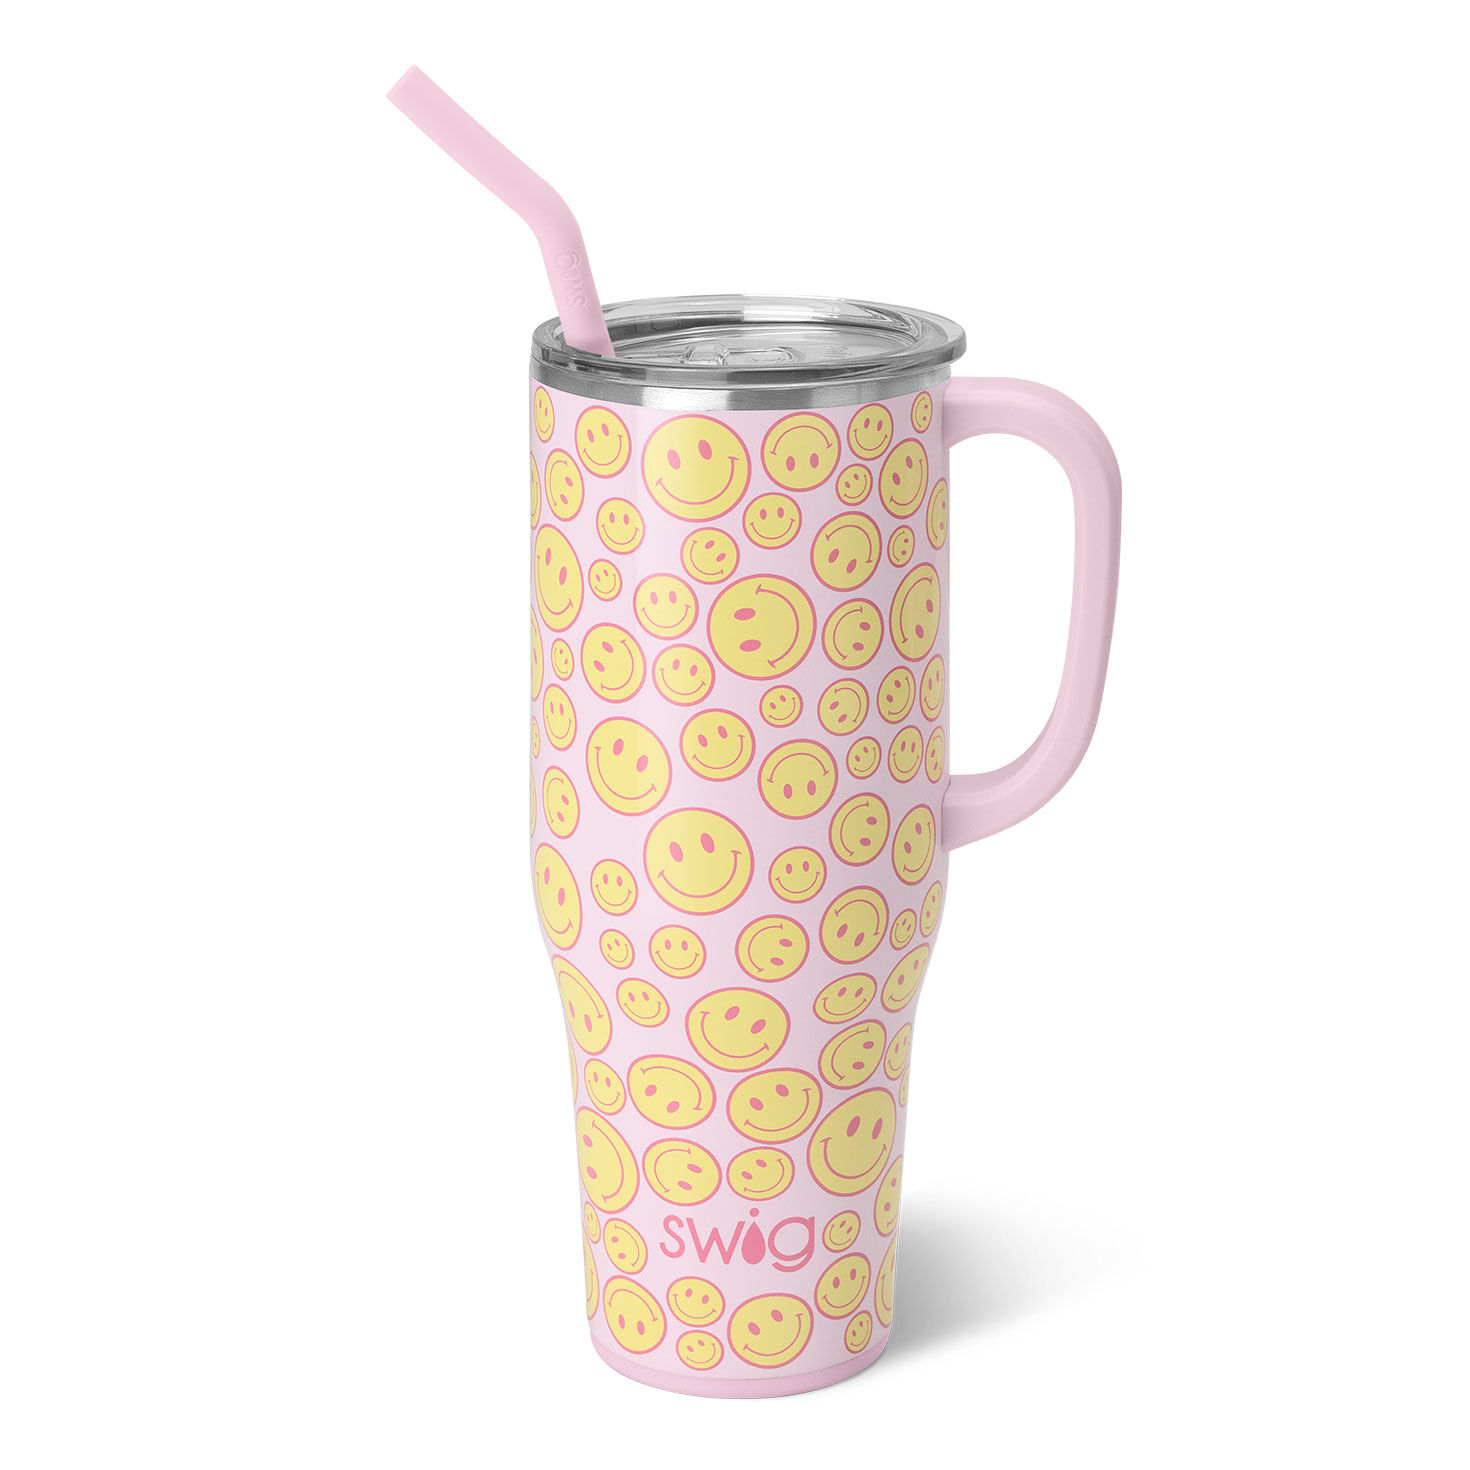 https://www.hallmark.com/dw/image/v2/AALB_PRD/on/demandware.static/-/Sites-hallmark-master/default/dw0119a5d9/images/finished-goods/products/S102M40OH/Yellow-Smiley-Faces-on-Pink-Travel-Mug-With-Handle_S102M40OH_01.jpg?sfrm=jpg